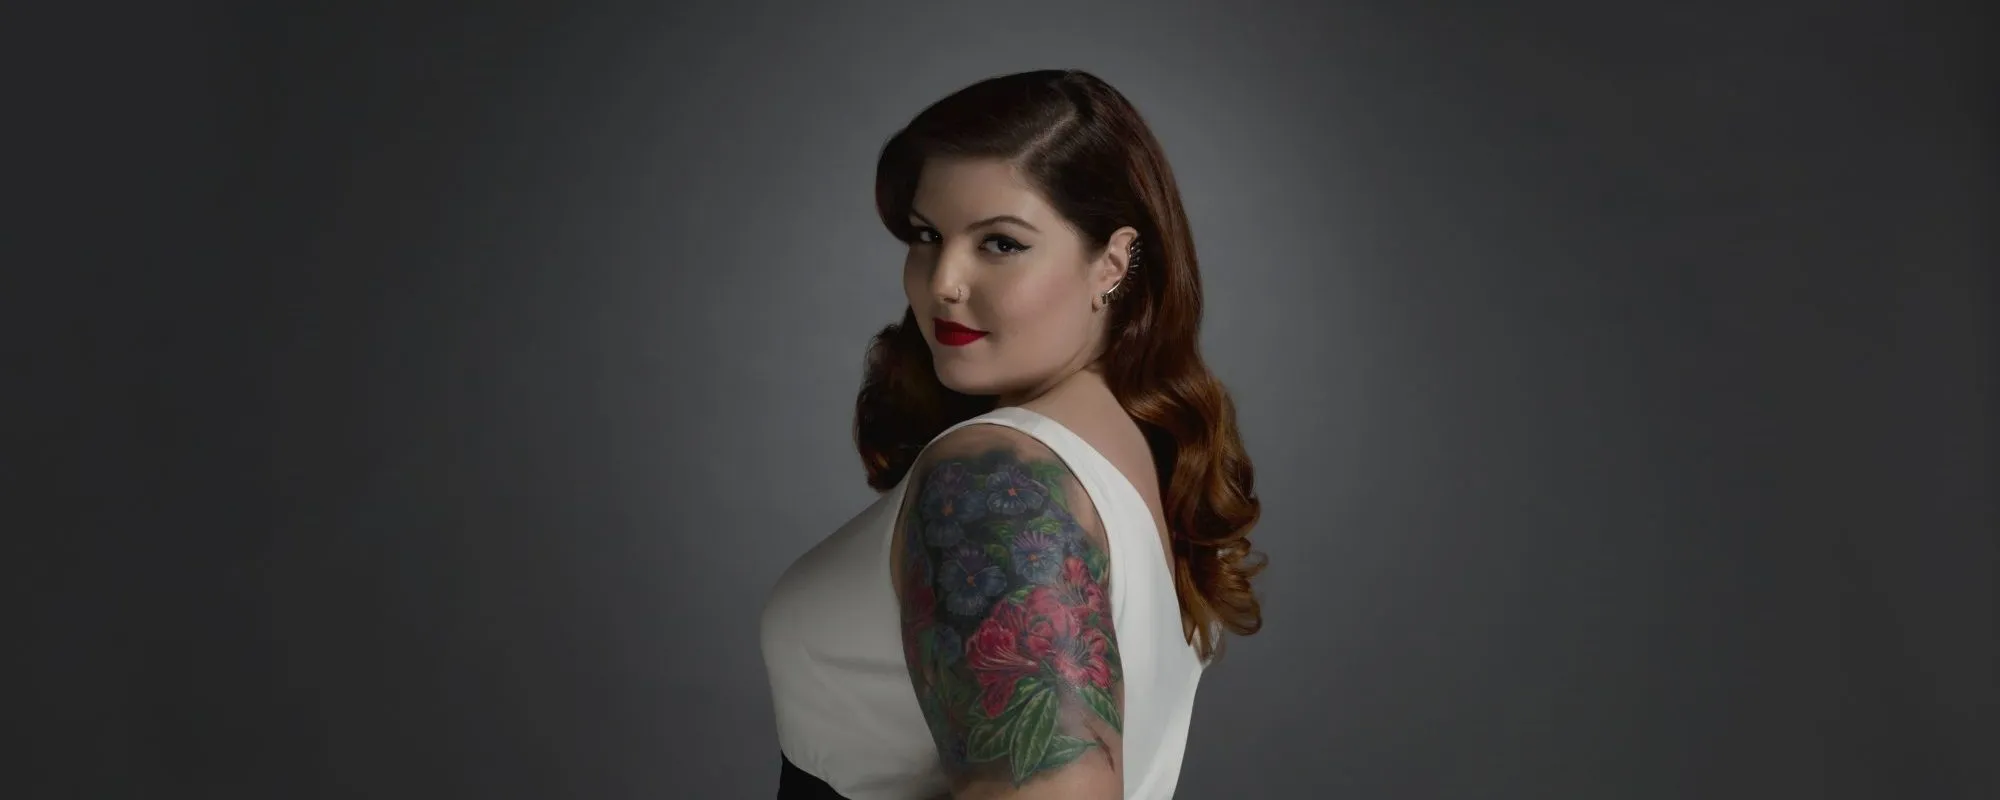 Behind the Song: Mary Lambert On Writing “Same Love” With Macklemore & Ryan Lewis